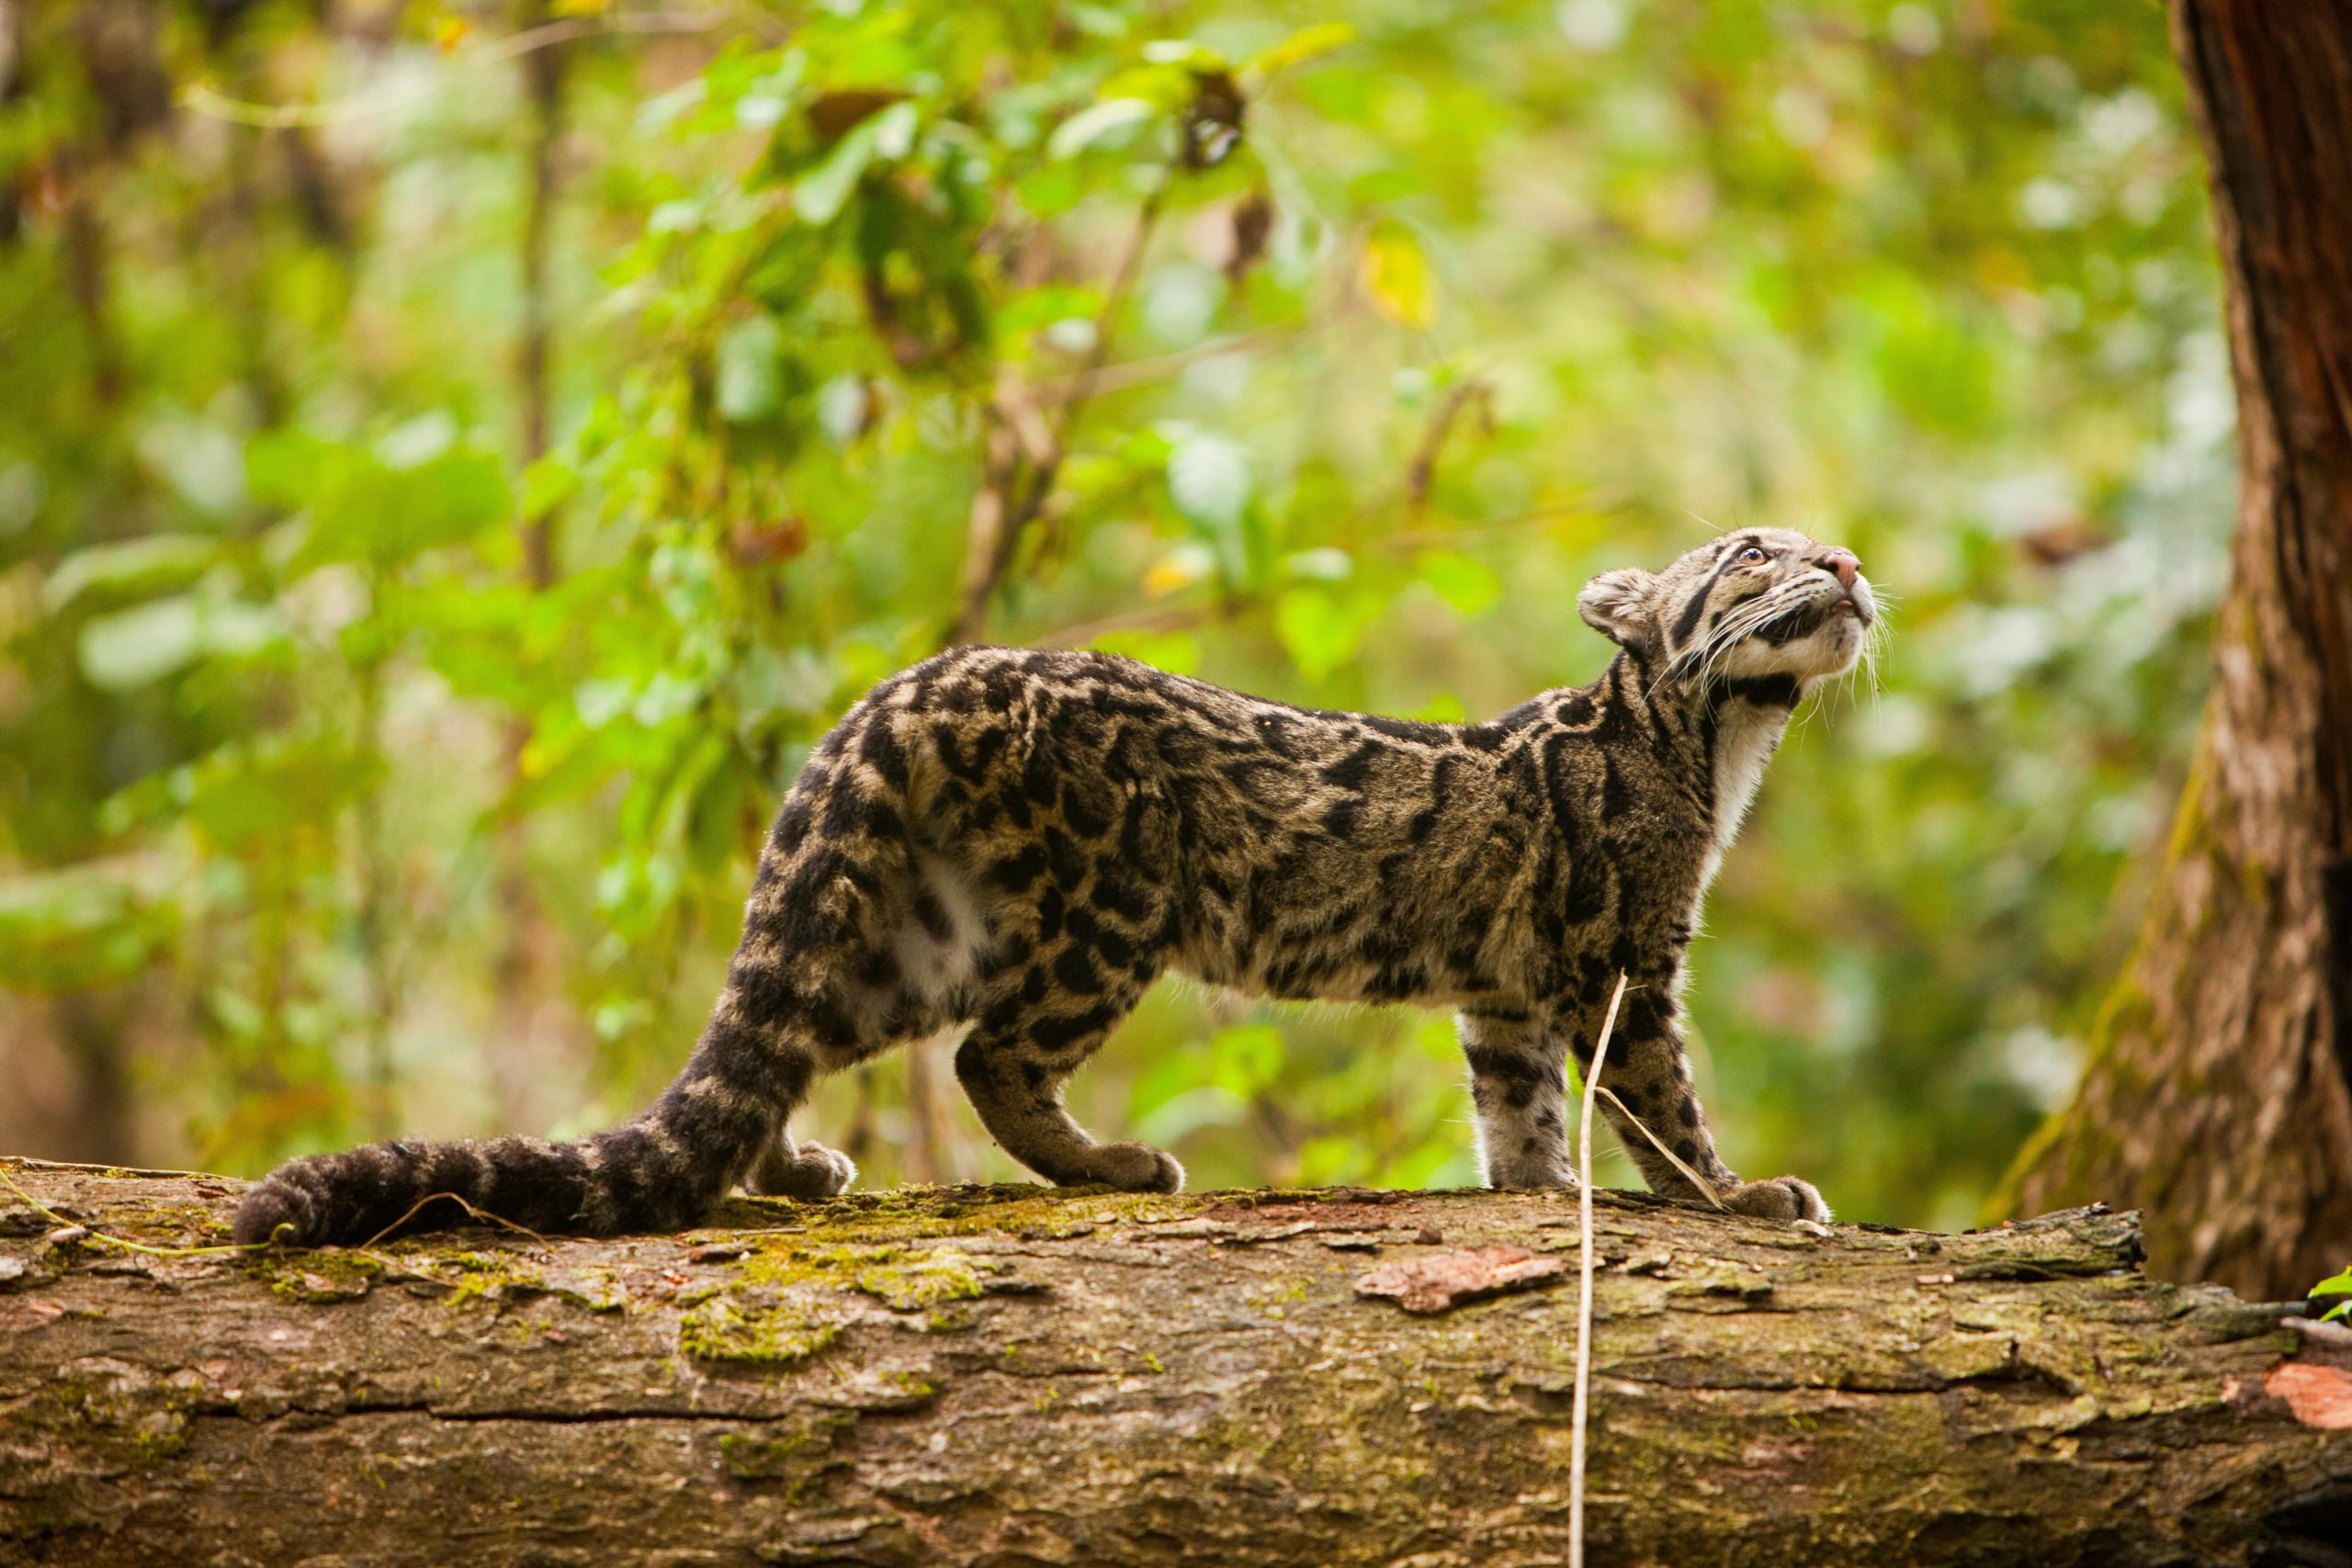 A clouded leopard relocated to Manas National Park, Assam, in an attempt to raise the population of the endangered big cat (image: Alamy)